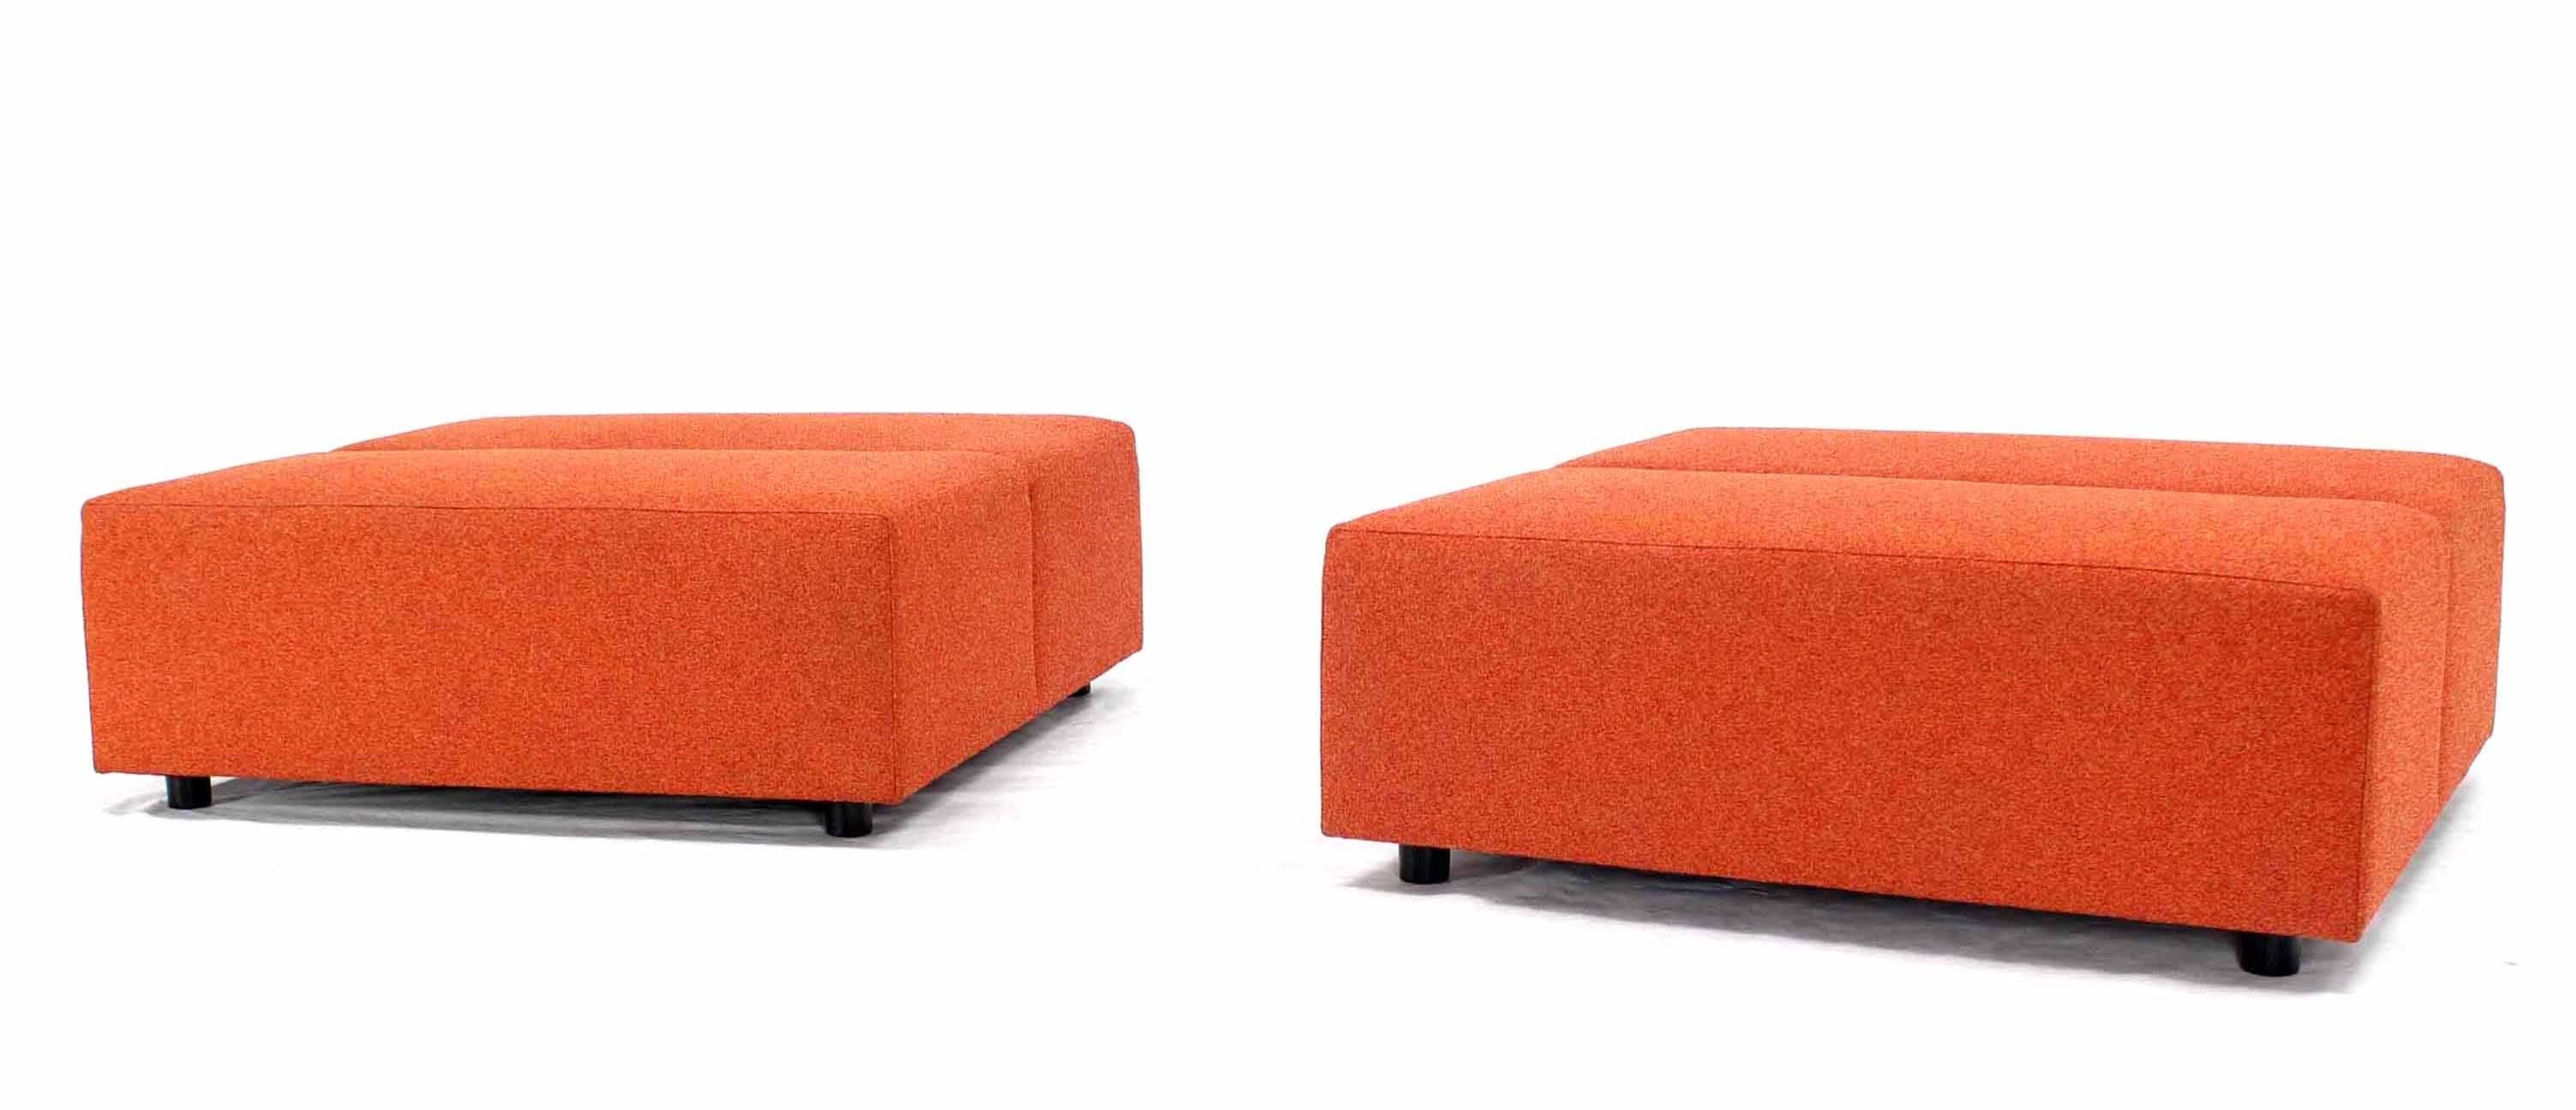 Pair of oversize mid century modern benches by Steelcase.